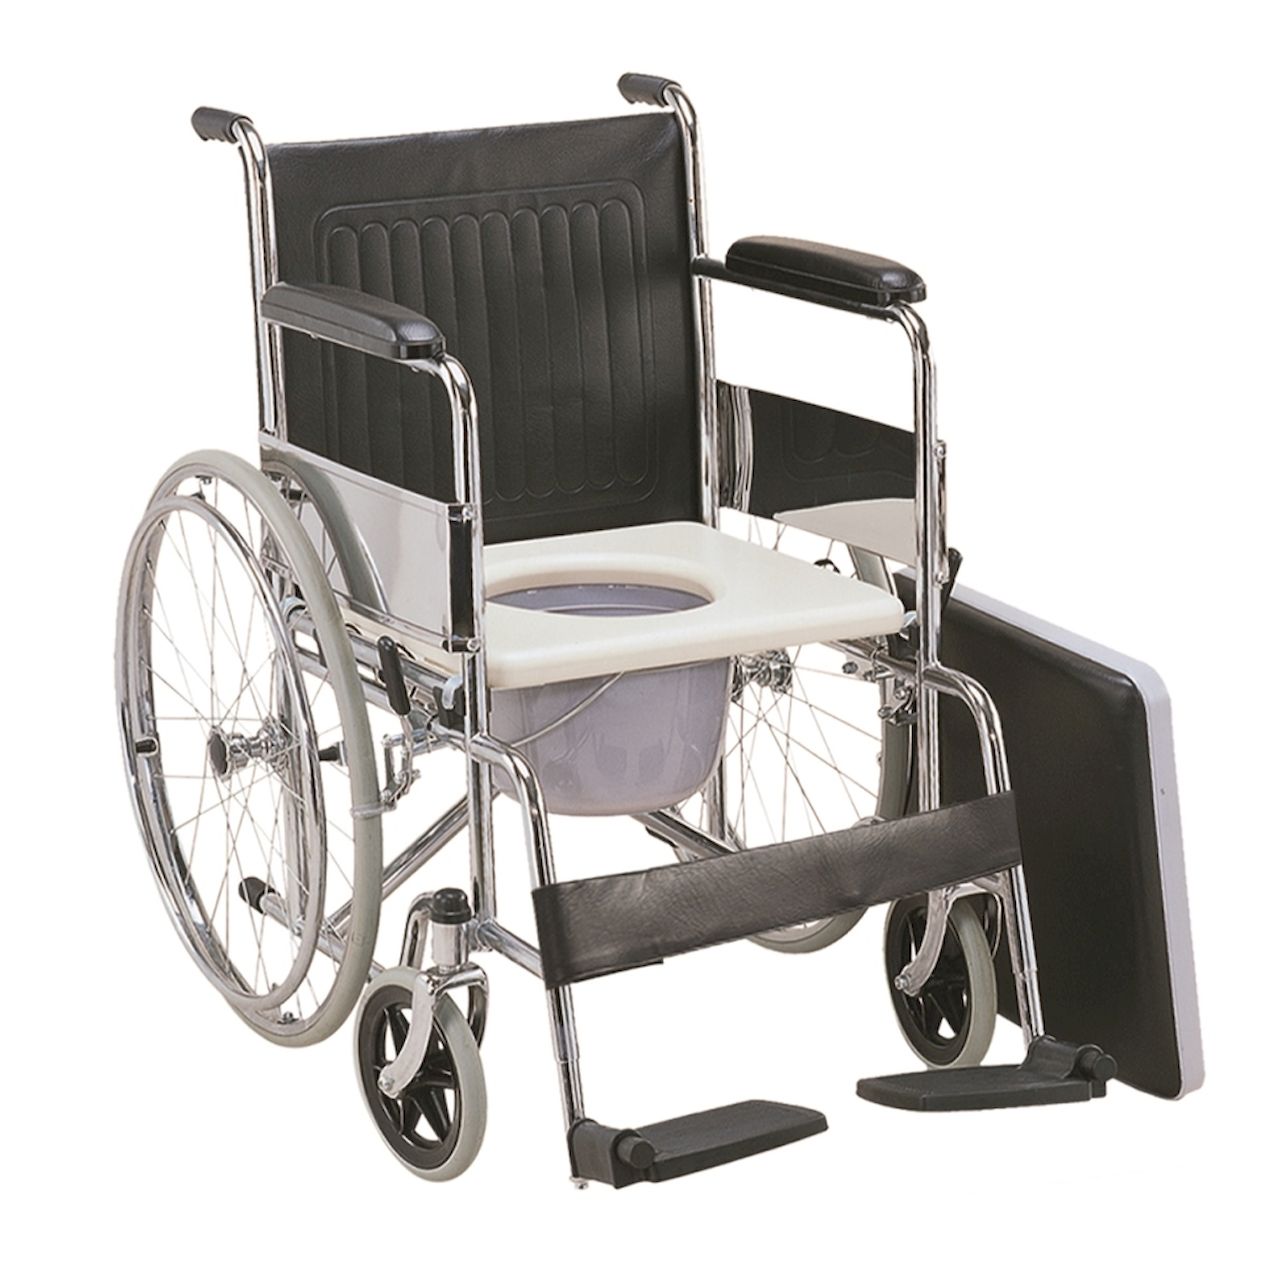 Karma Commode Wheelchair Rainbow 7 On Sale Suppliers, Service Provider in Chandni chowk